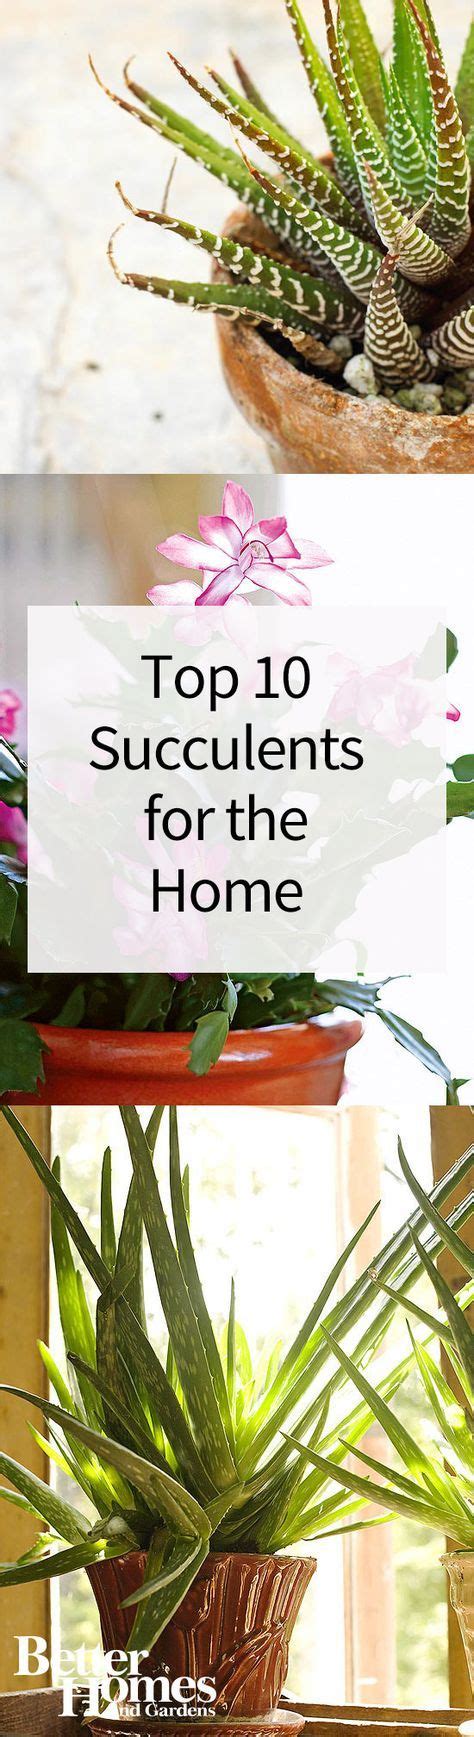 These 10 Succulents Are Some Of The Easiest To Grow Indoors Succulent